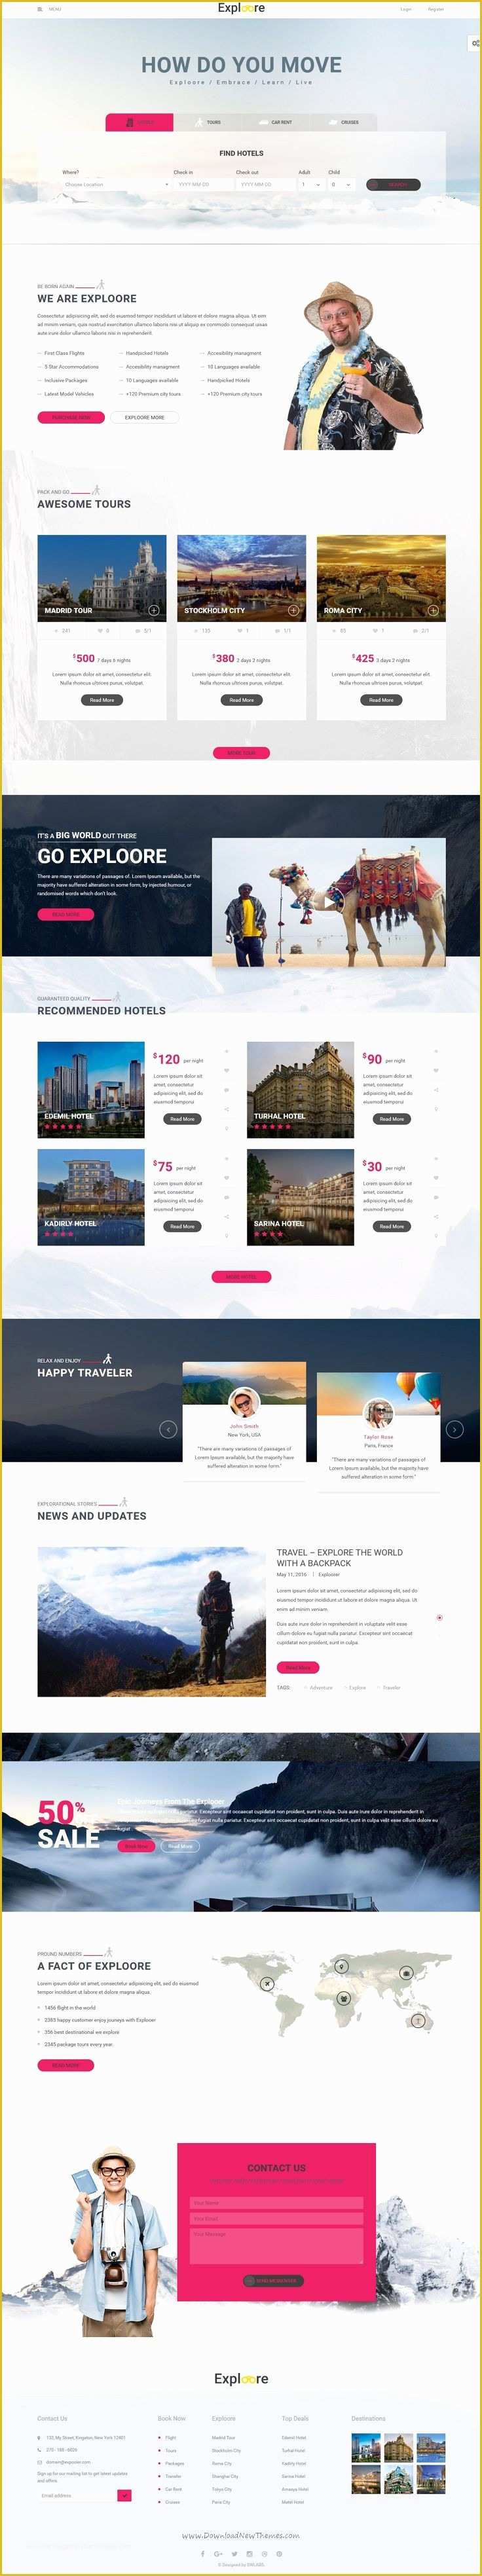 Travel Booking Website Templates Free Download Of 25 Beautiful Travel Website Design Ideas On Pinterest